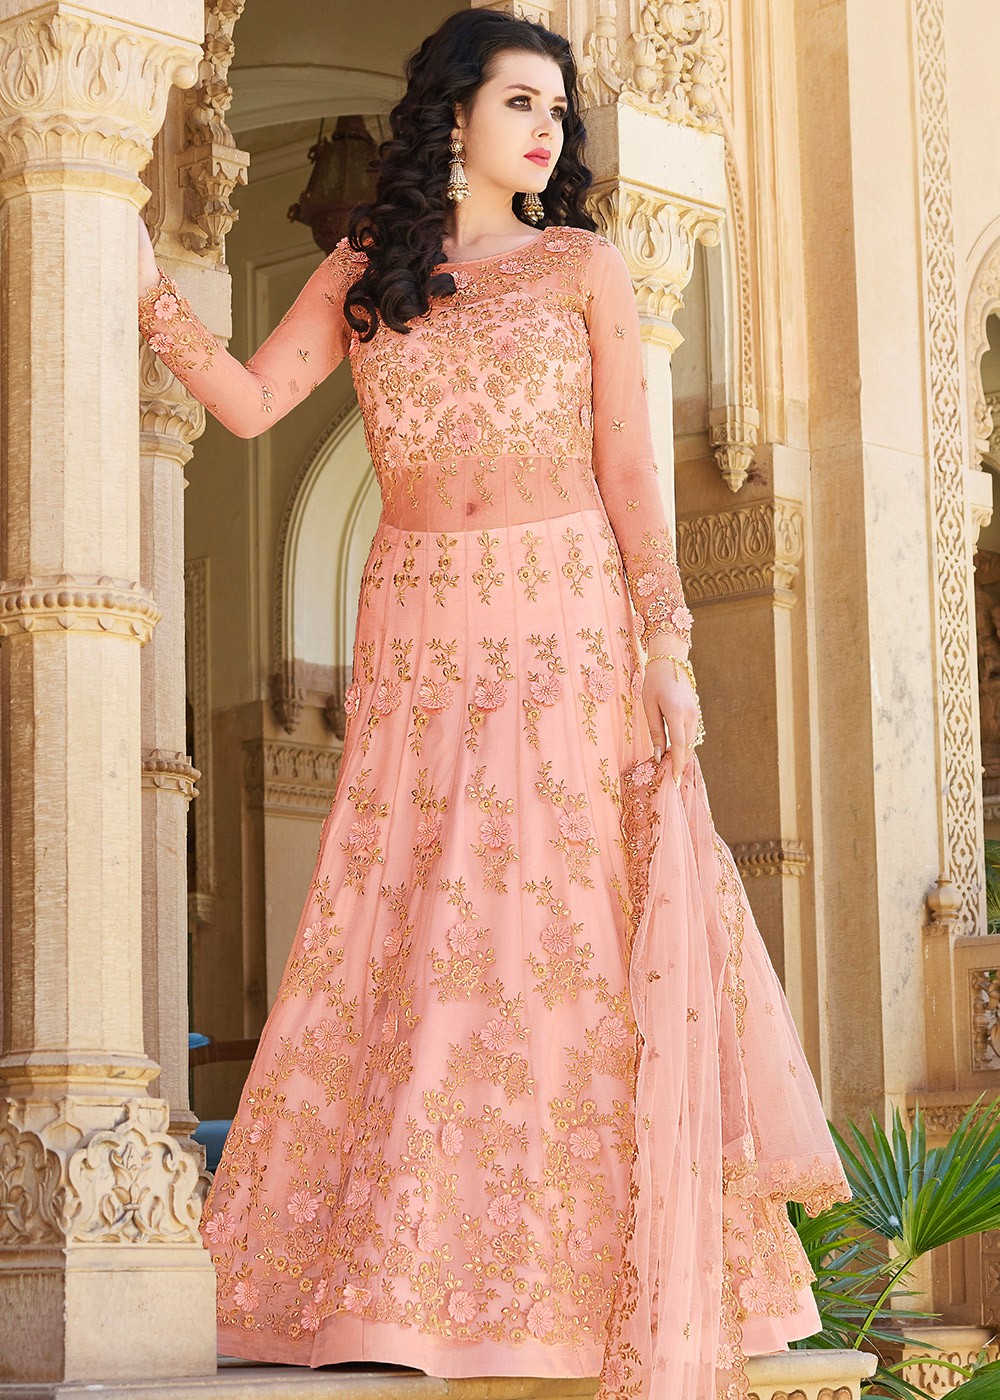 lehenga kurti designs, lehenga kurti designs Suppliers and Manufacturers at  Alibaba.com